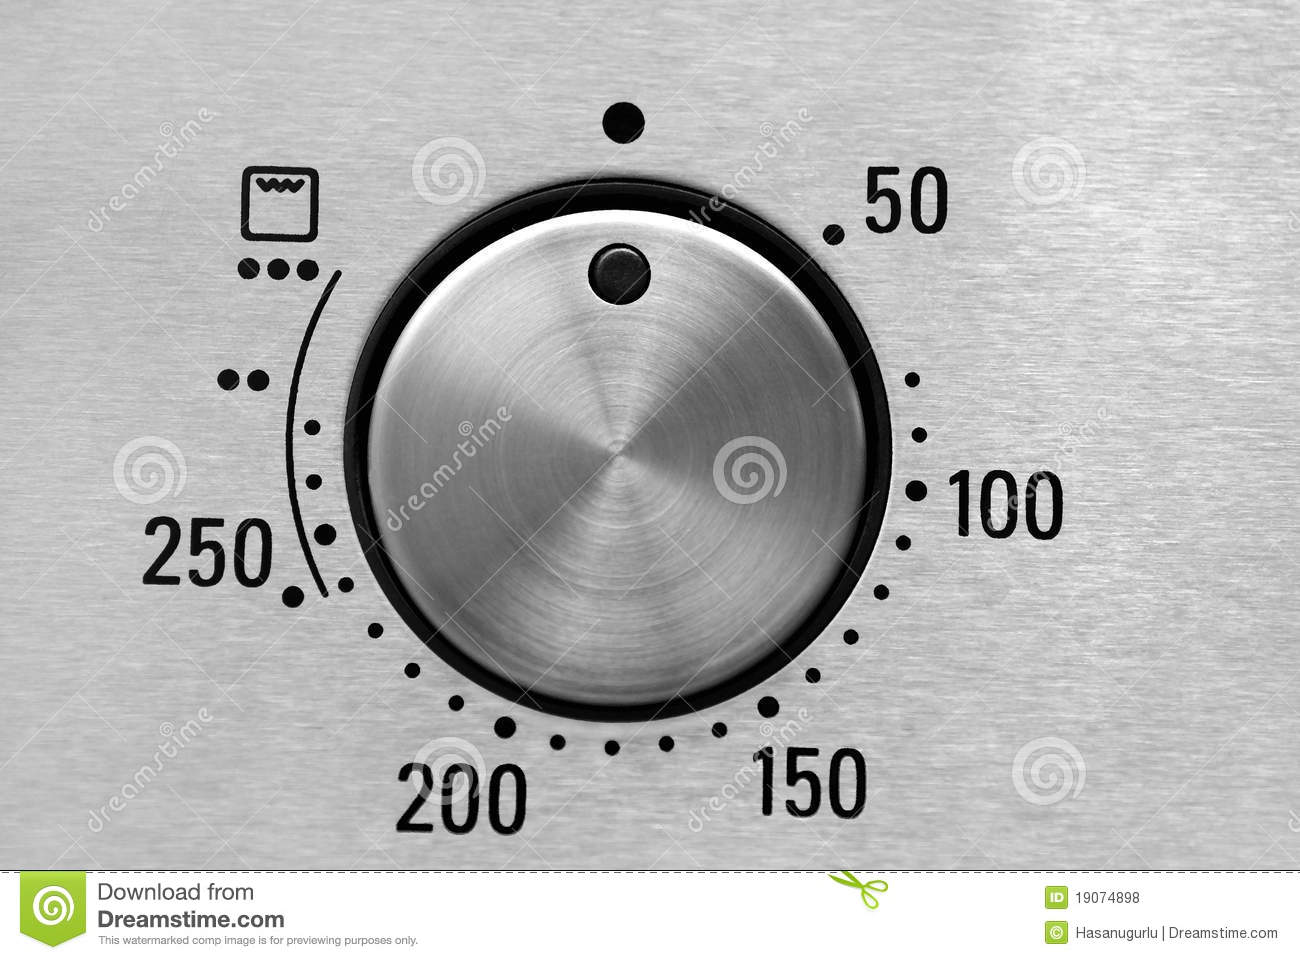 Oven Temperature Royalty Free Stock Photos   Image  19074898